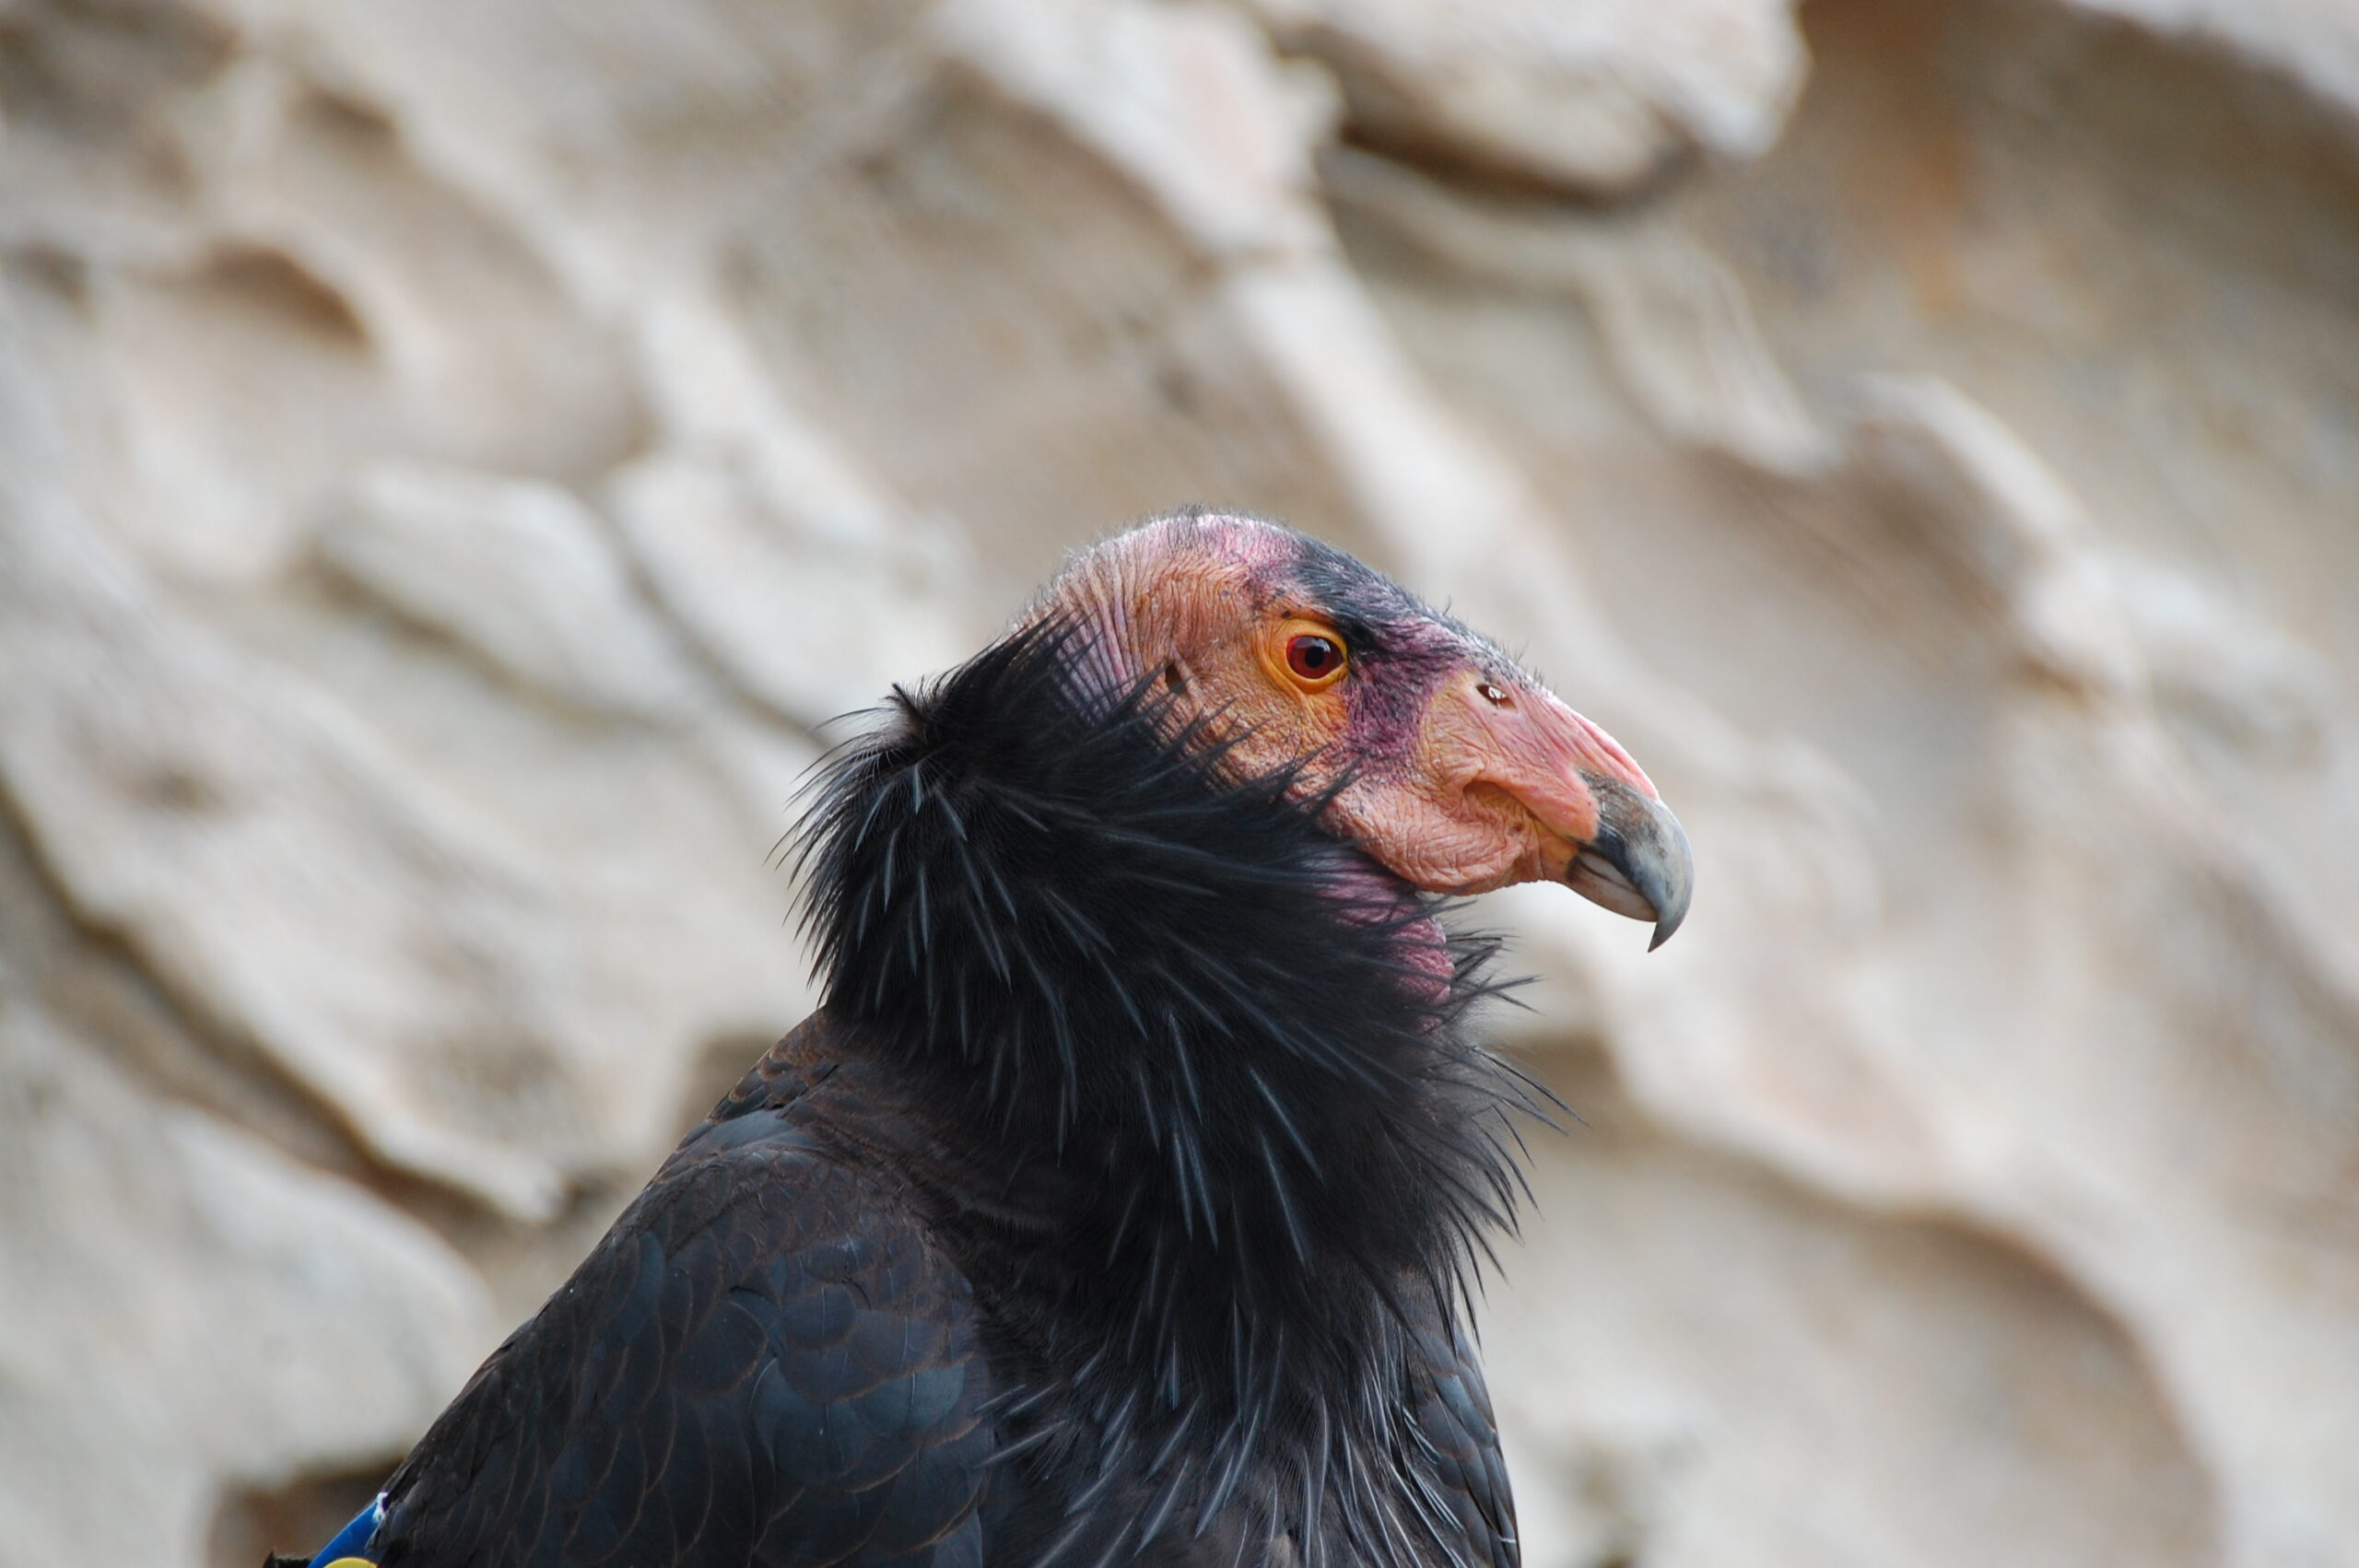 Contaminated Carcasses Are Poisoning Critically Endangered California Condors